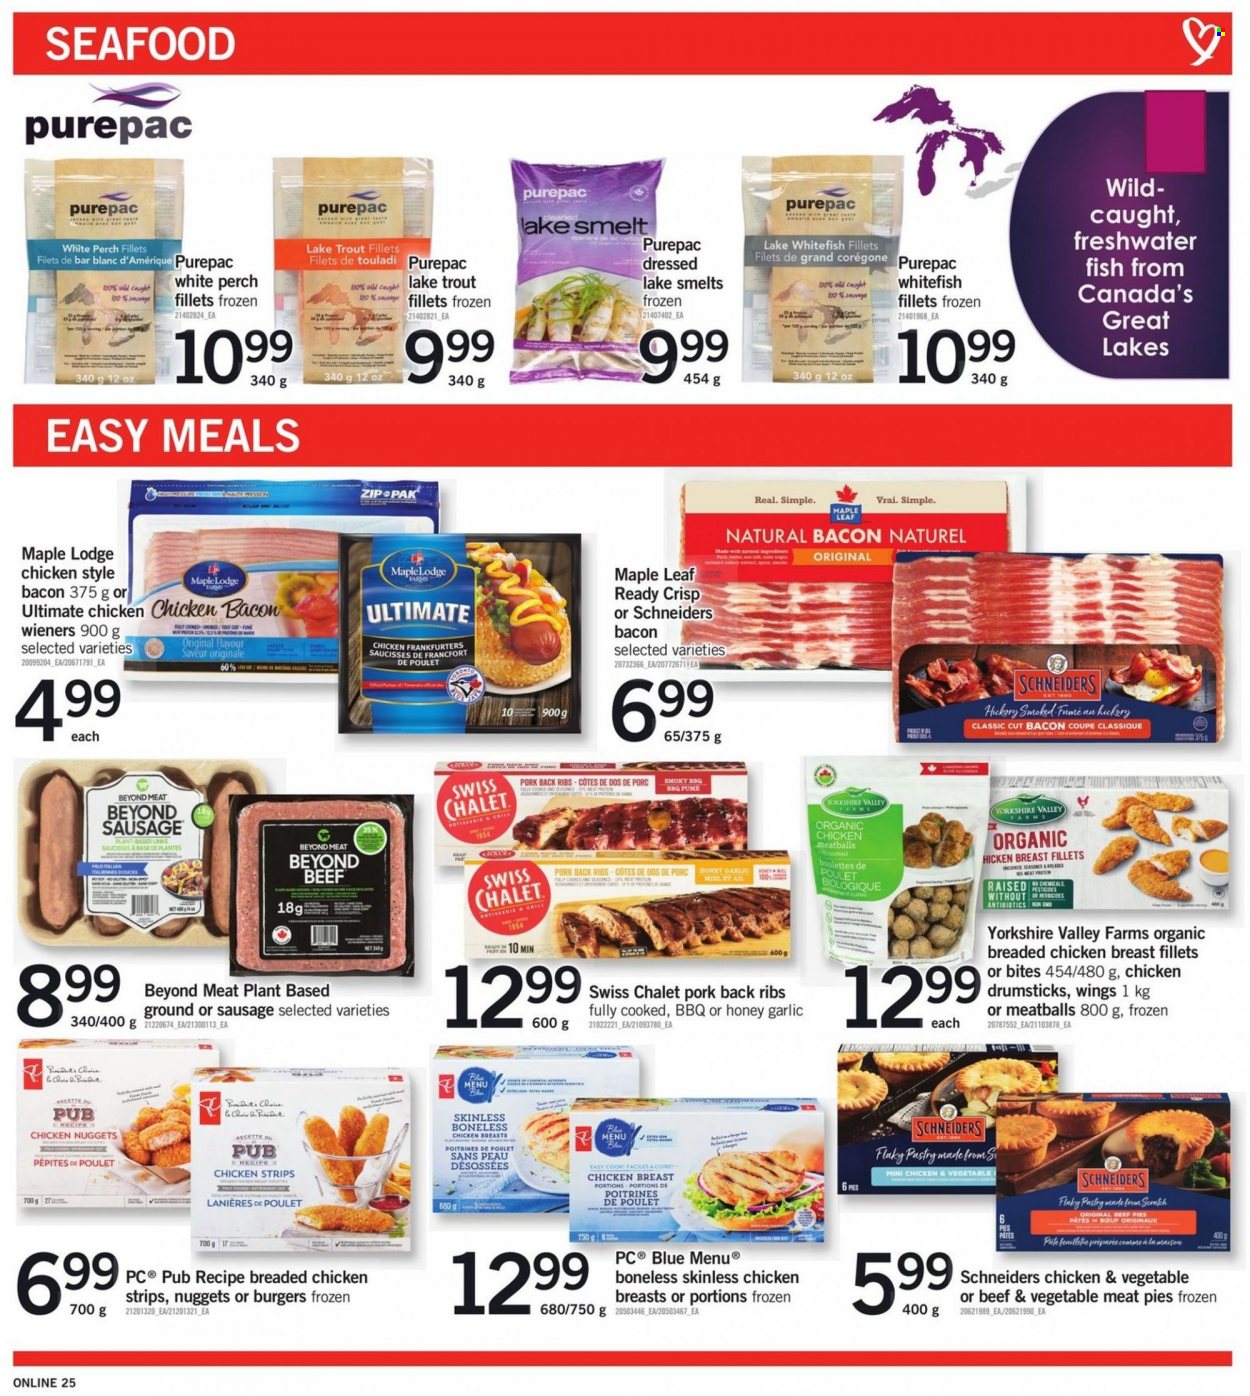 thumbnail - Fortinos Flyer - January 13, 2022 - January 19, 2022 - Sales products - garlic, trout, whitefish, perch, seafood, fish, meatballs, nuggets, fried chicken, chicken nuggets, beef pie, bacon, sausage, strips, chicken strips, chicken drumsticks, chicken, pork meat, pork ribs, pork back ribs, Omo, WD. Page 6.